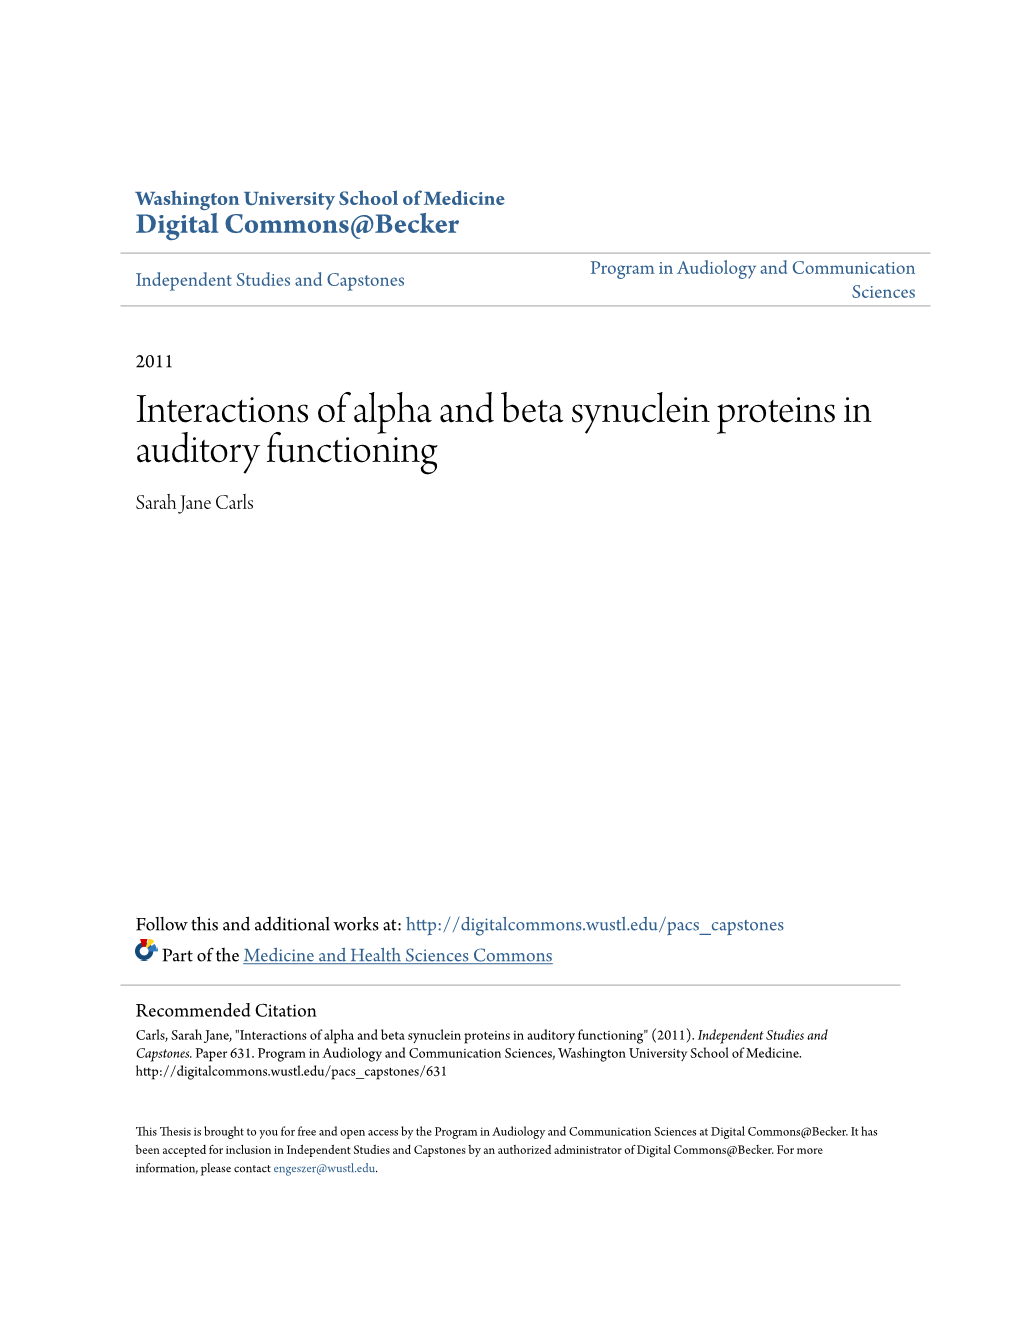 Interactions of Alpha and Beta Synuclein Proteins in Auditory Functioning Sarah Jane Carls